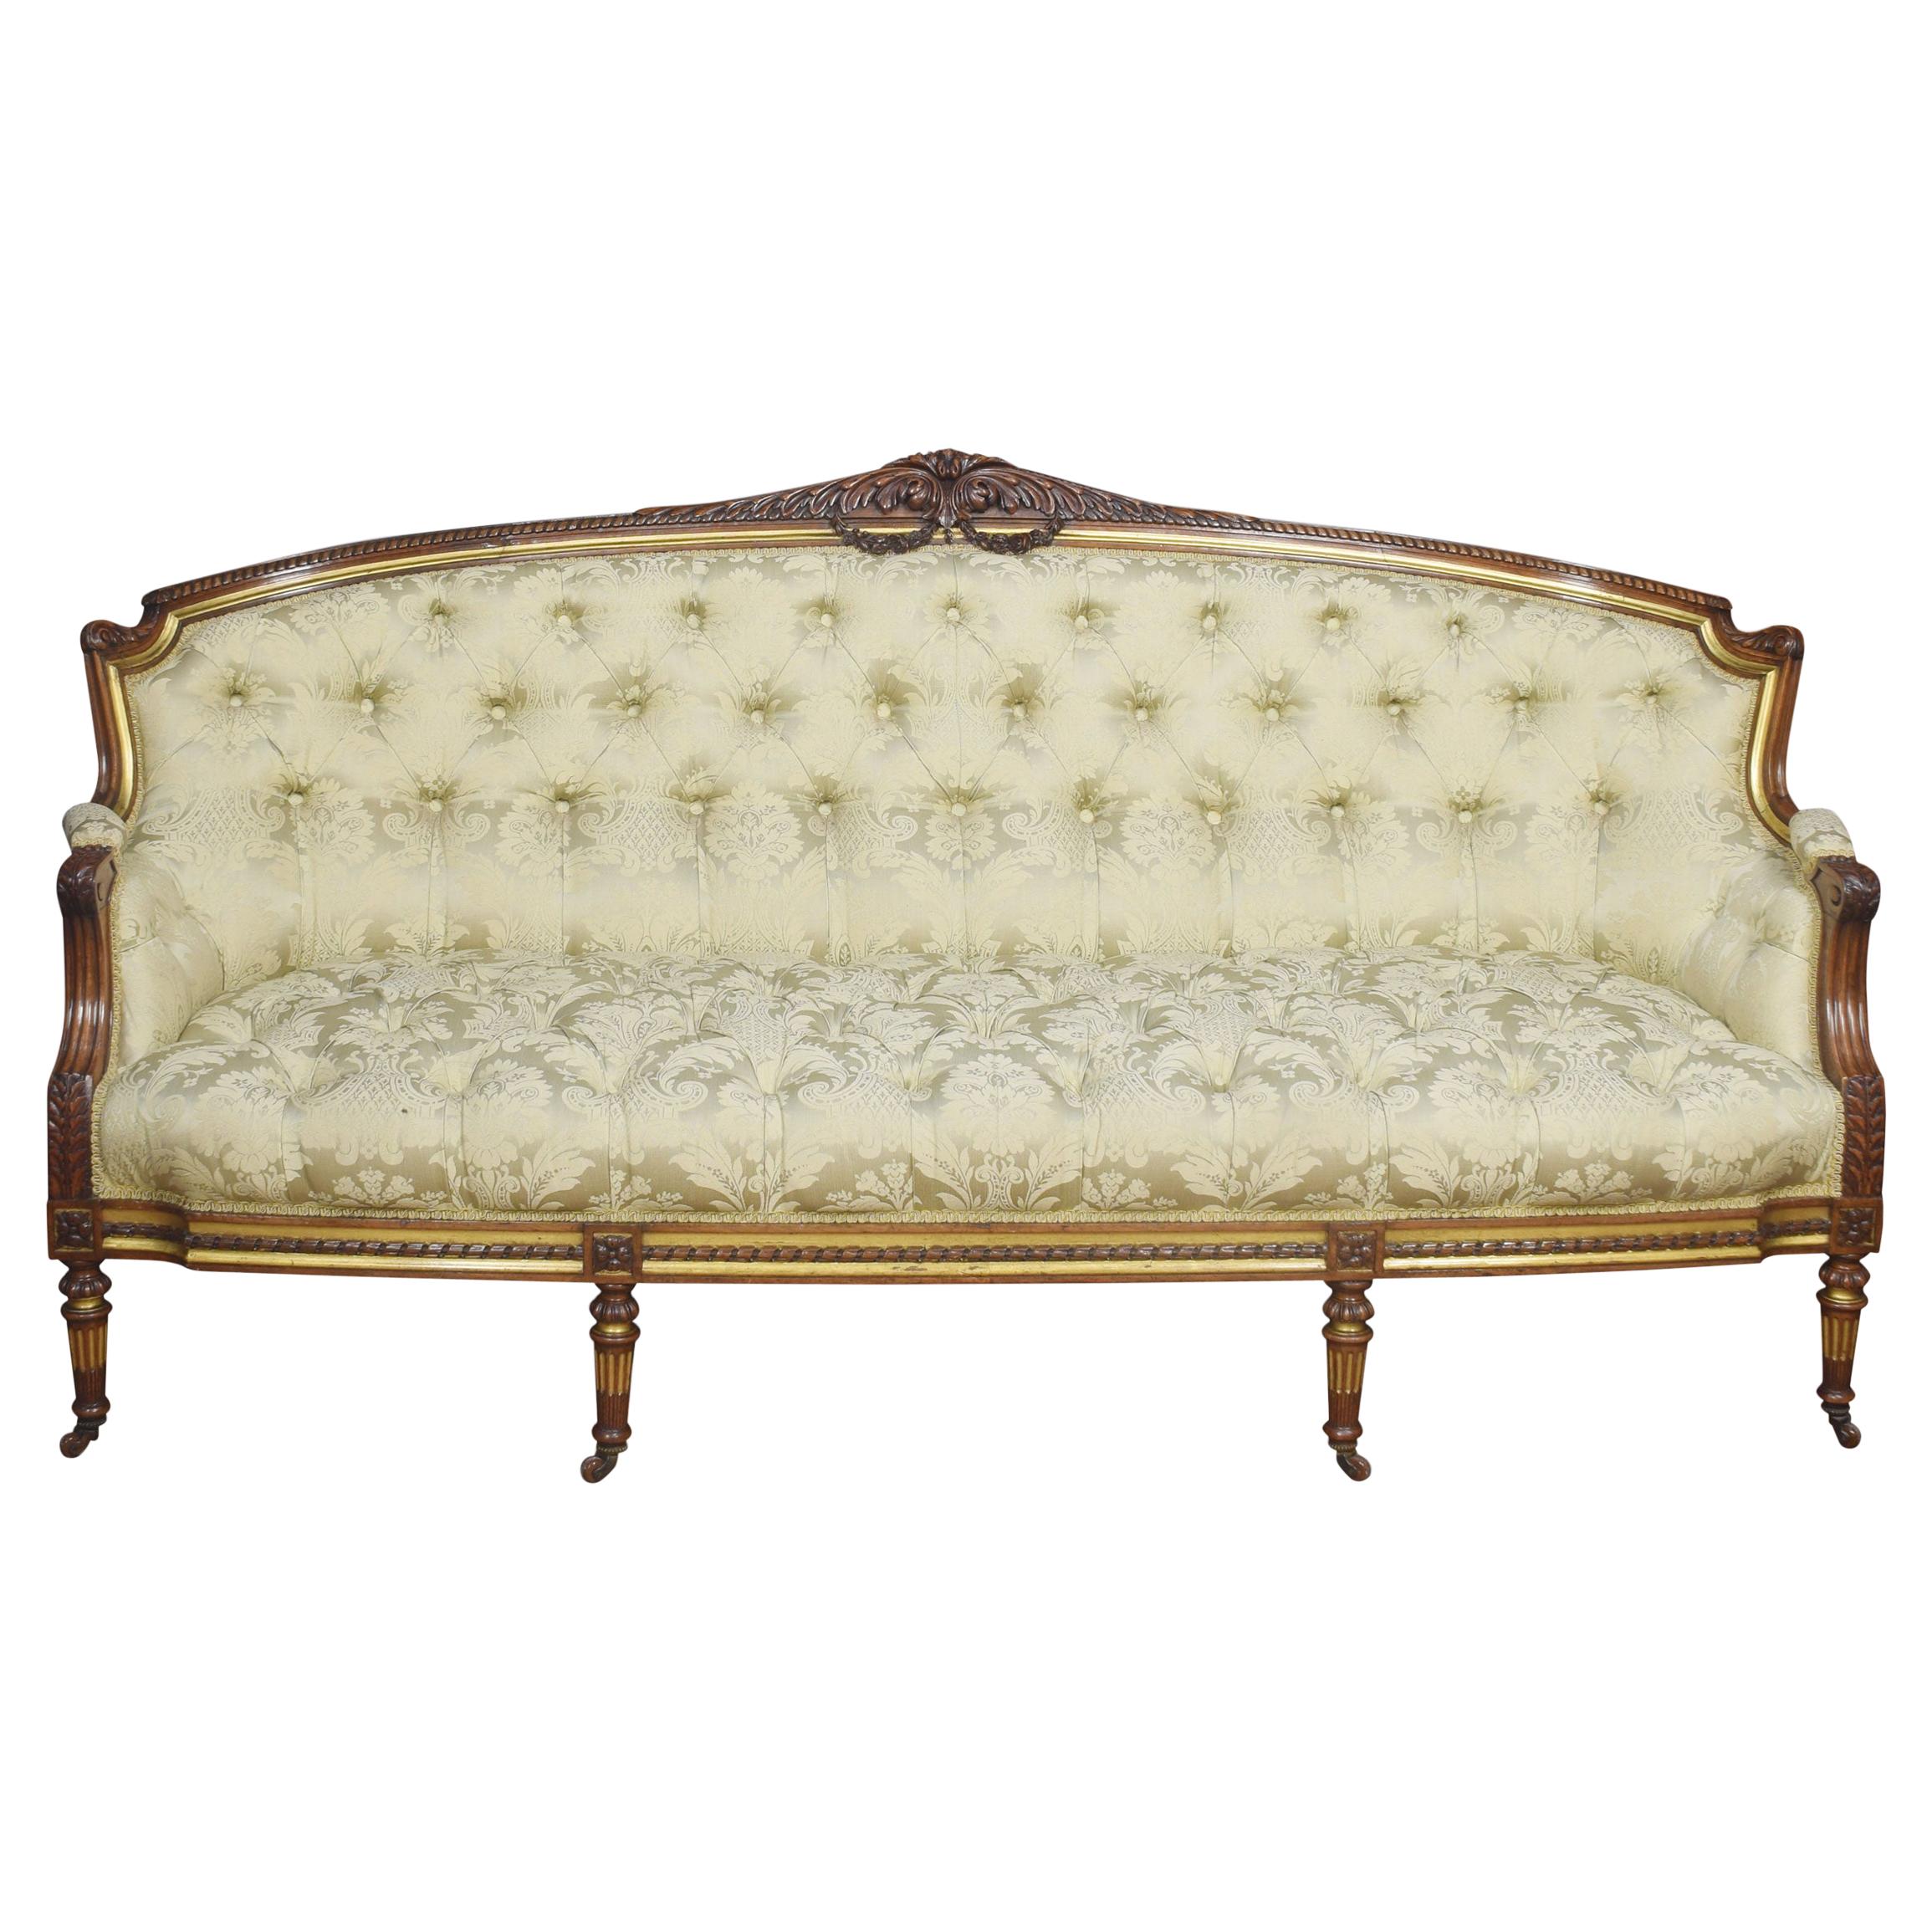 19th Century Carved Walnut and Parcel Gilt Sofa